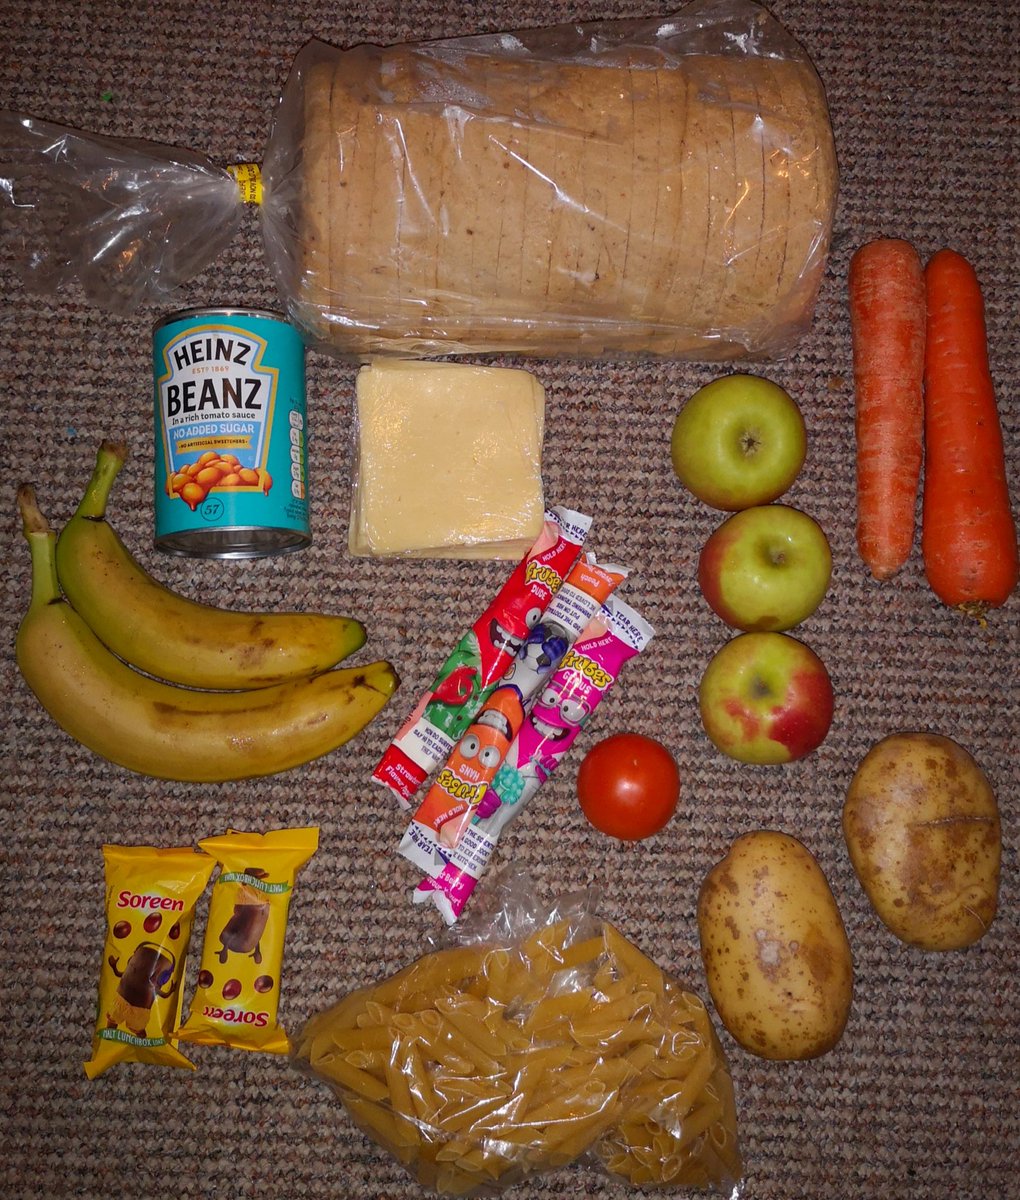 Meal bag given to school kids in Kuhmo, Finland Vs the UK